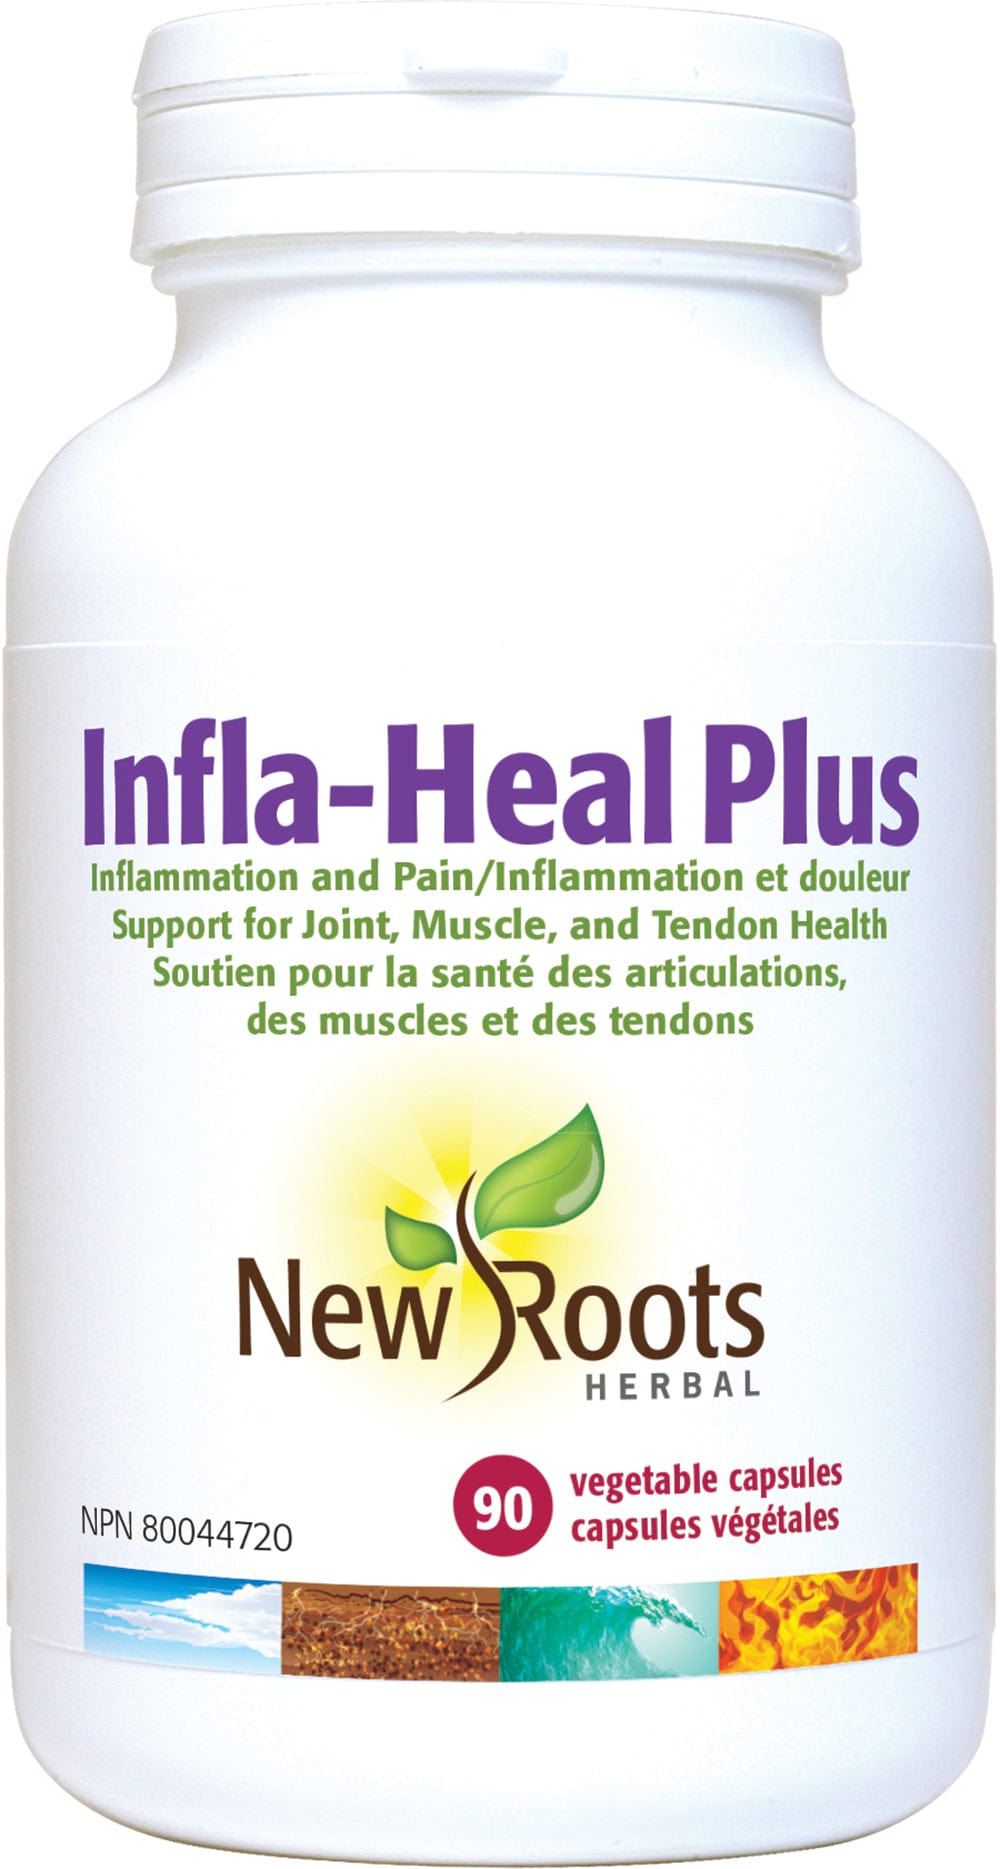 NEW ROOTS HERBAL Suppléments Infla-Heal Plus / Infla-soin 90comp